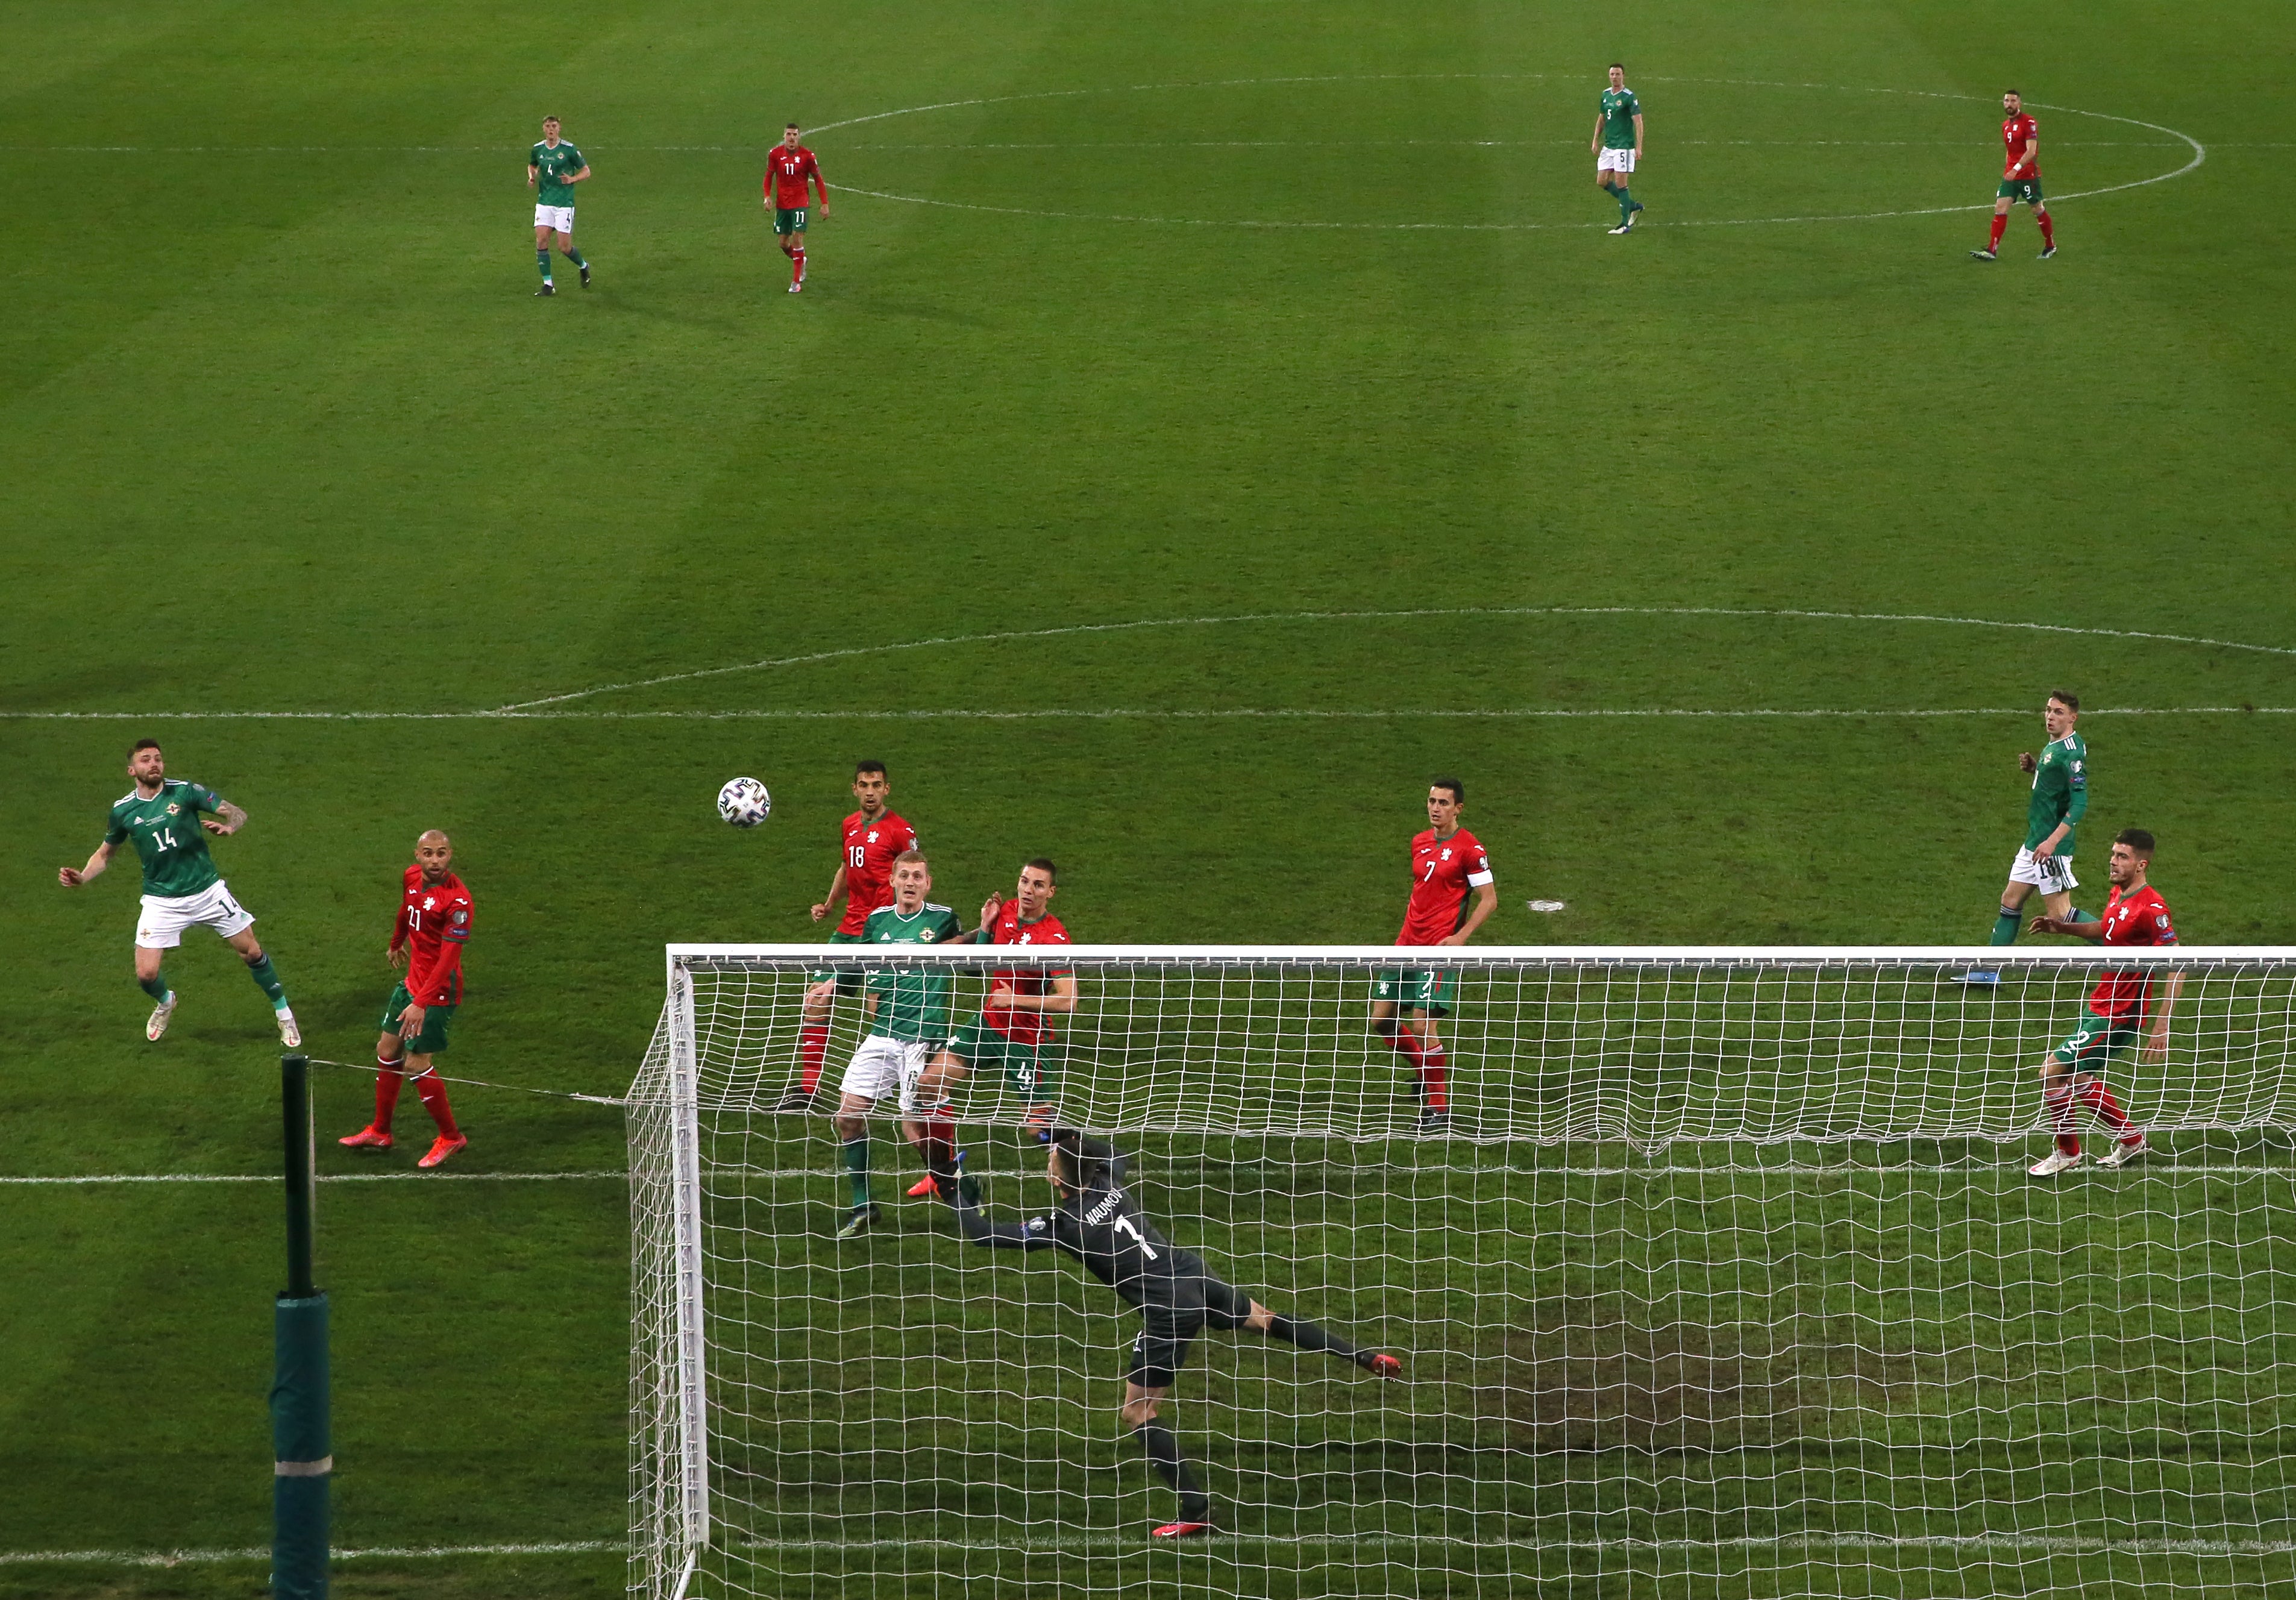 Stuart Dallas’ header hit the crossbar as the two sides drew 0-0 in Belfast in March (Brian Lawless/PA)